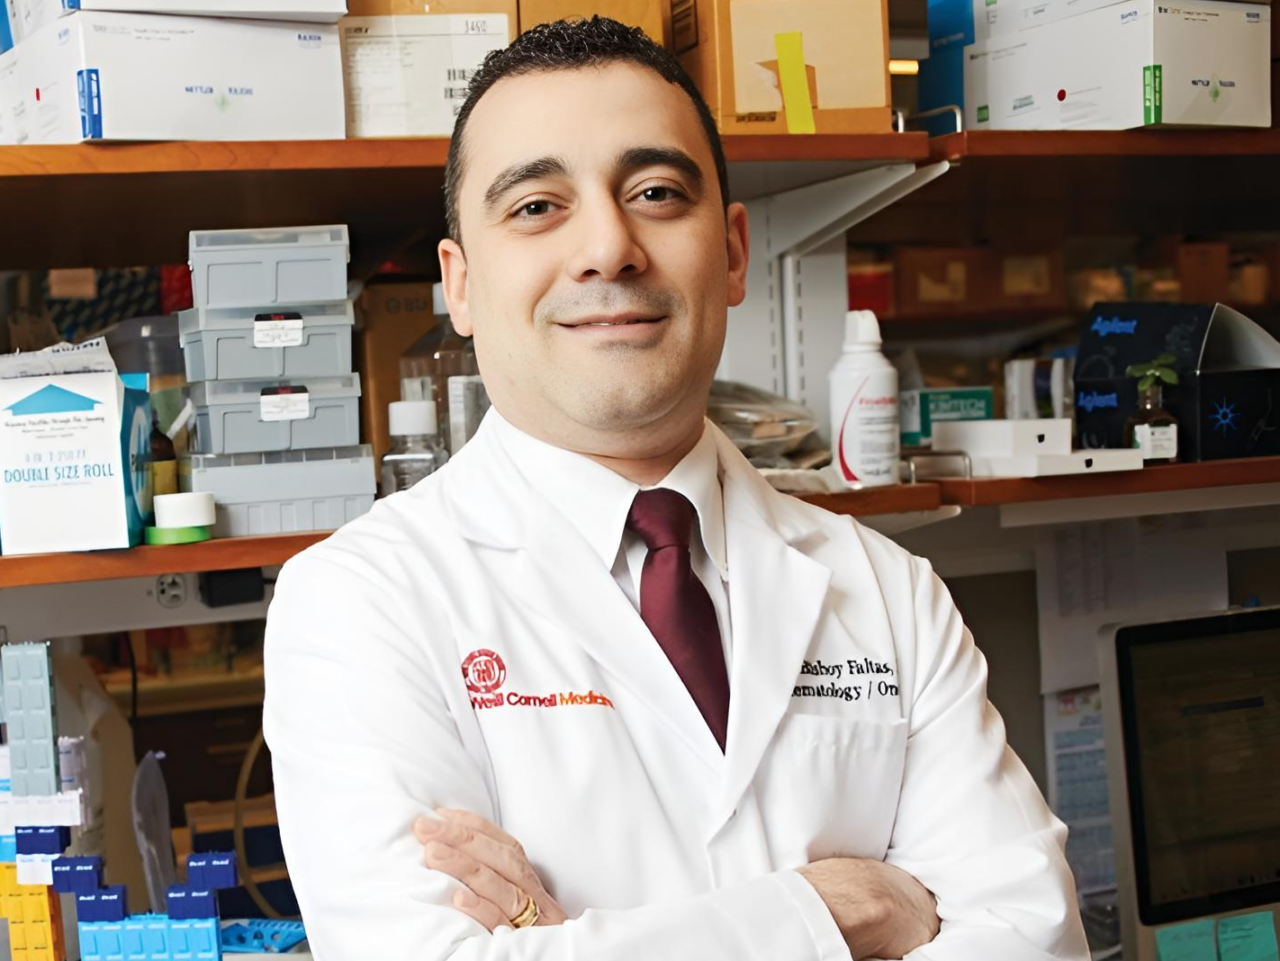 Bishoy Faltas: Thrilled to take on this new role as Chief Research Officer of the Englander Institute for Precision Medicine